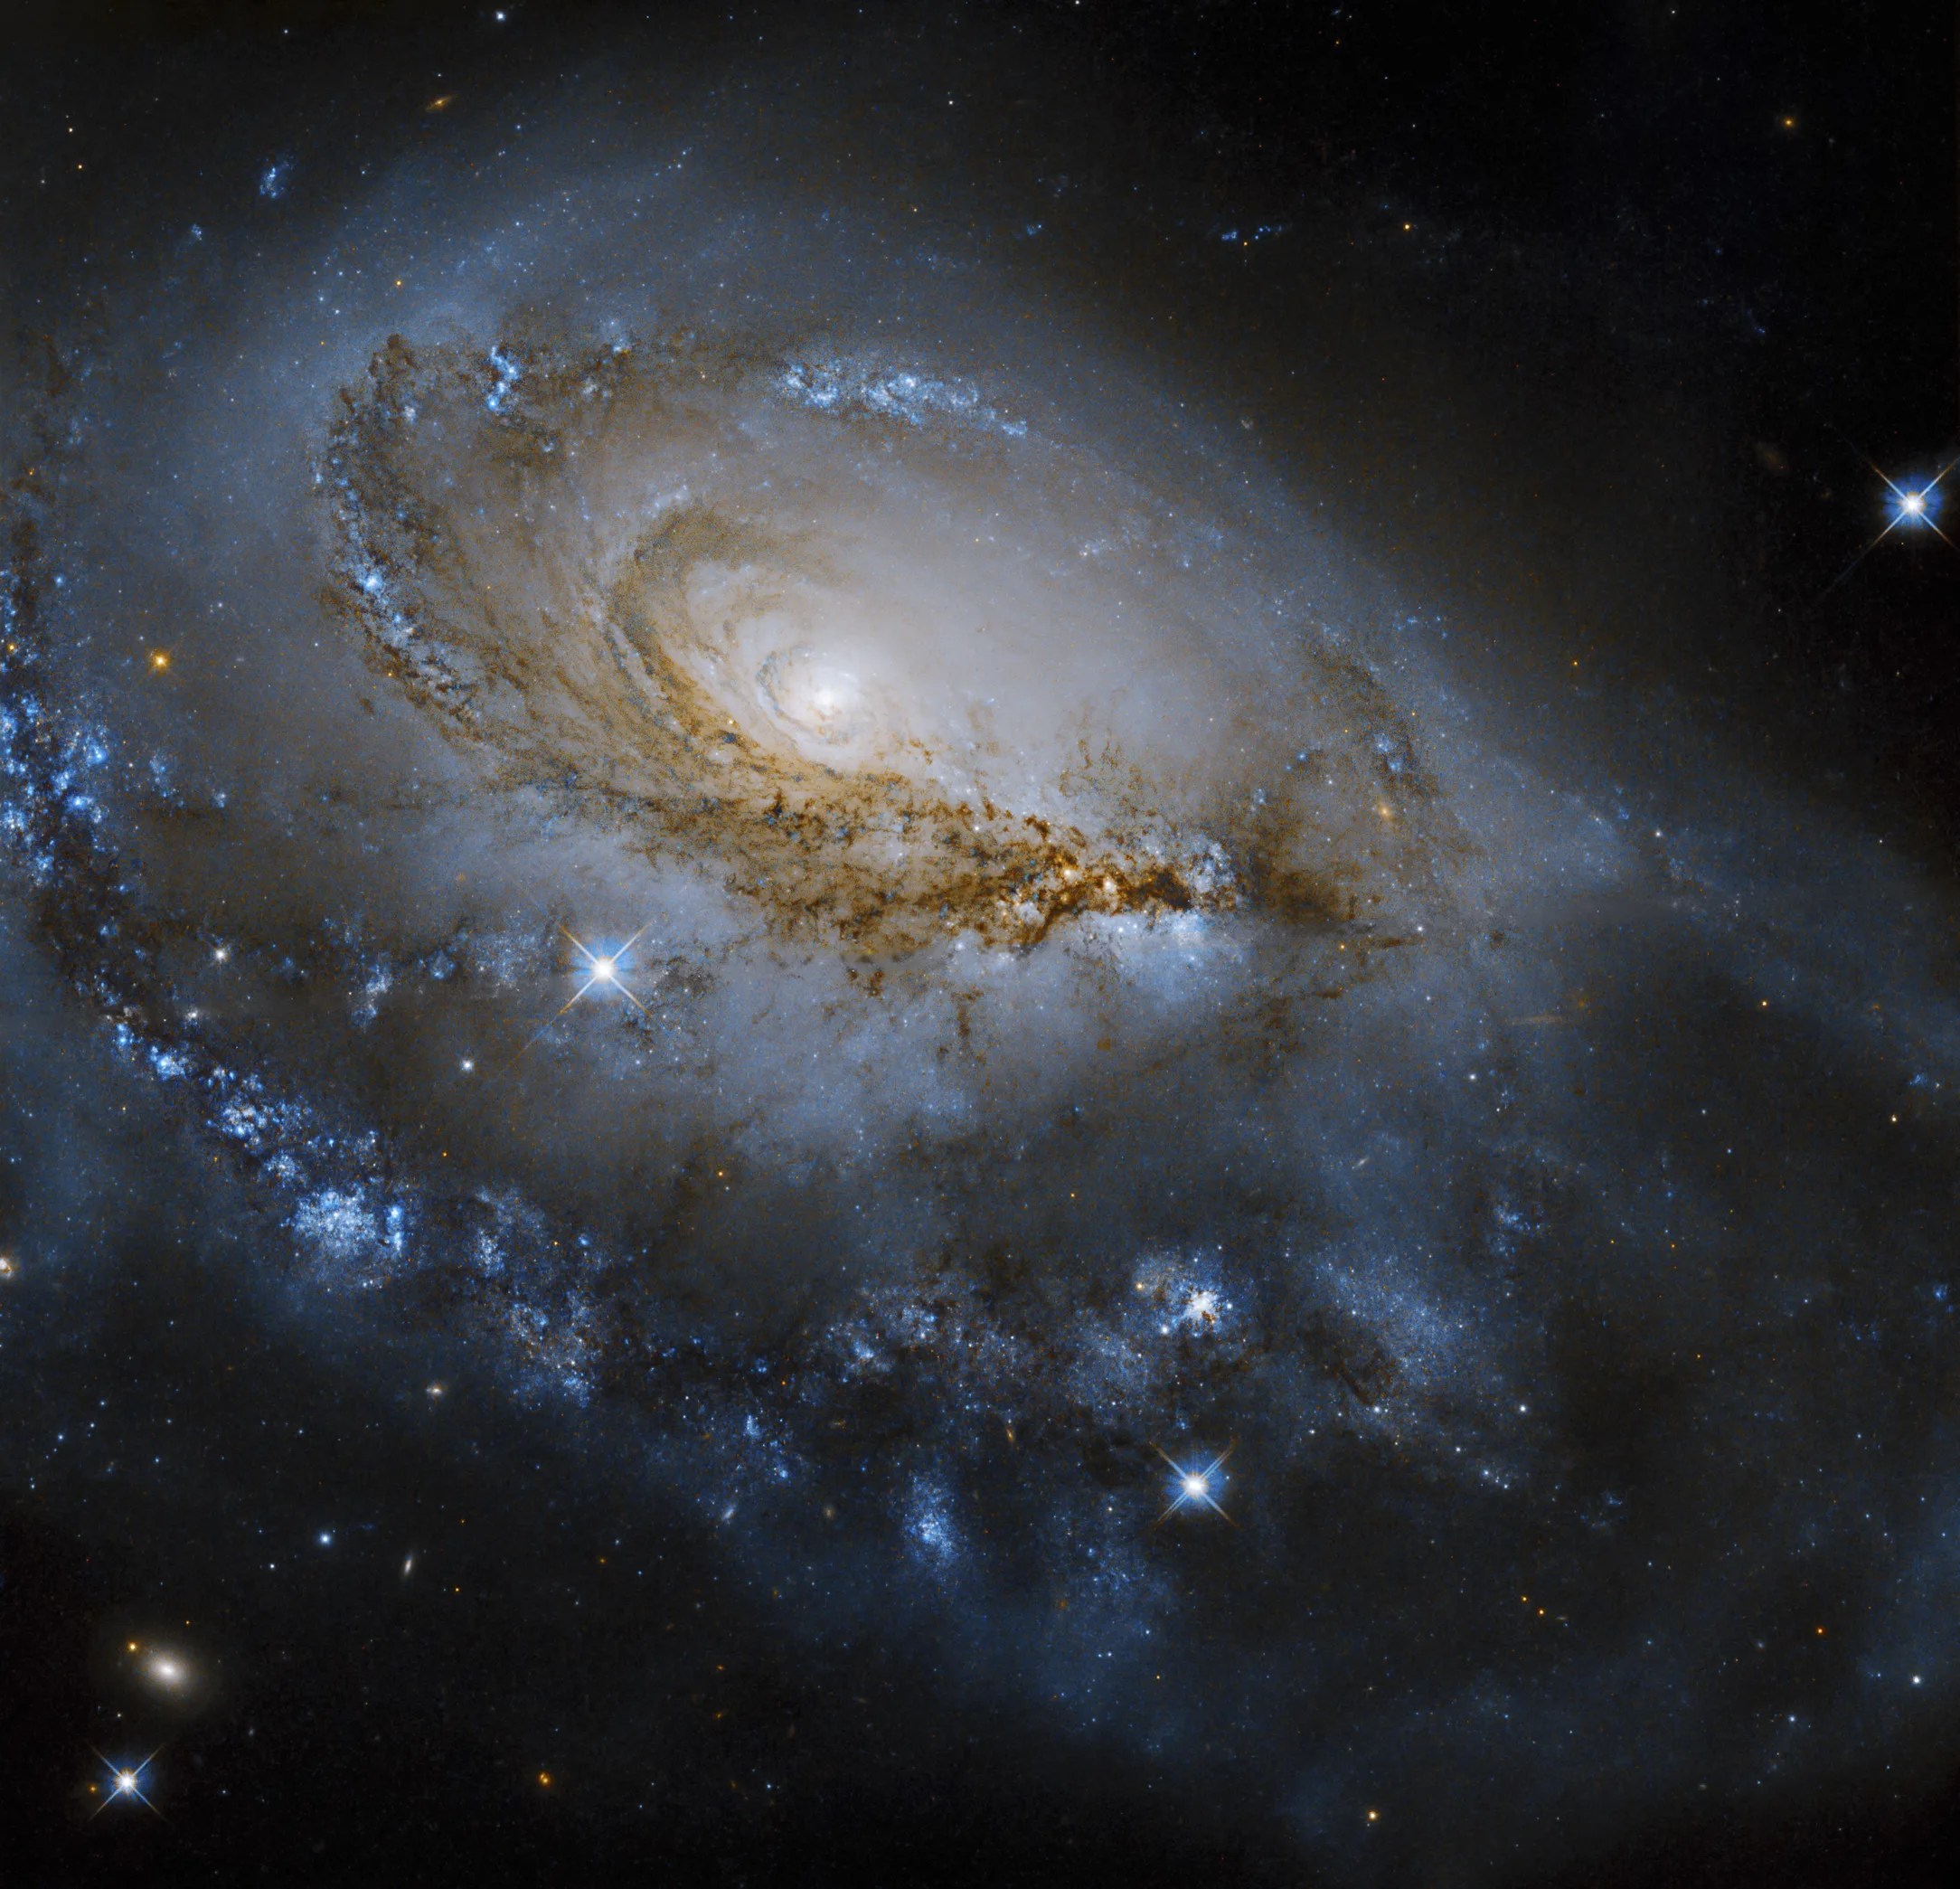 Bright spiral galaxy fills the scene. dark reddish-brown dust lanes bisect the spiral arms. bright blue stars are dotted troughout.